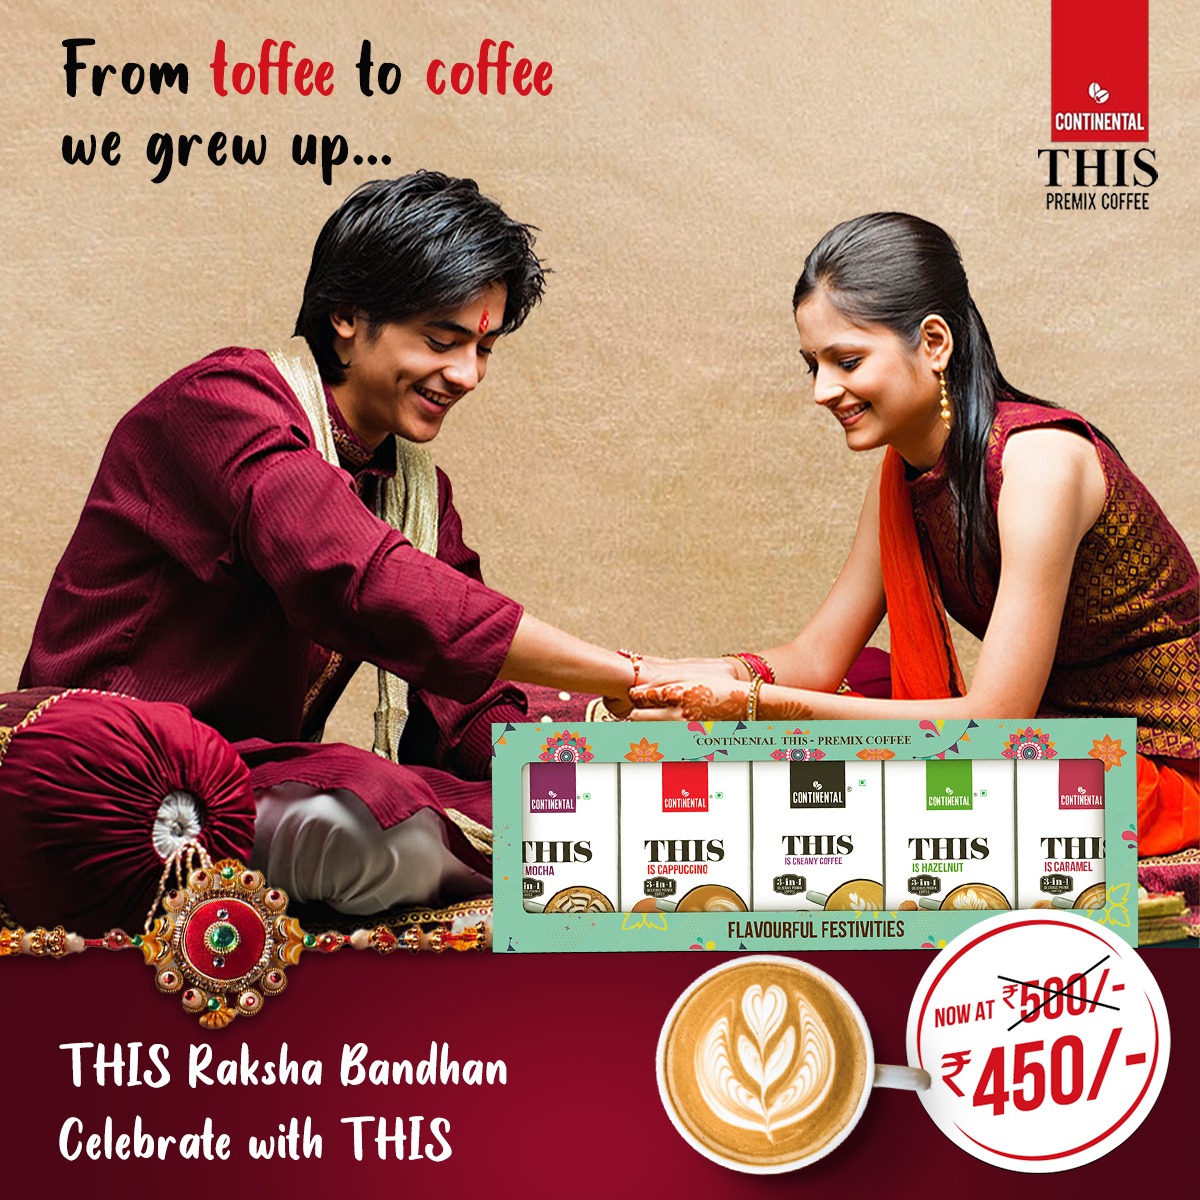 Continental THIS Premix Coffee - A delightful gift to make Raksha Bandhan extra special